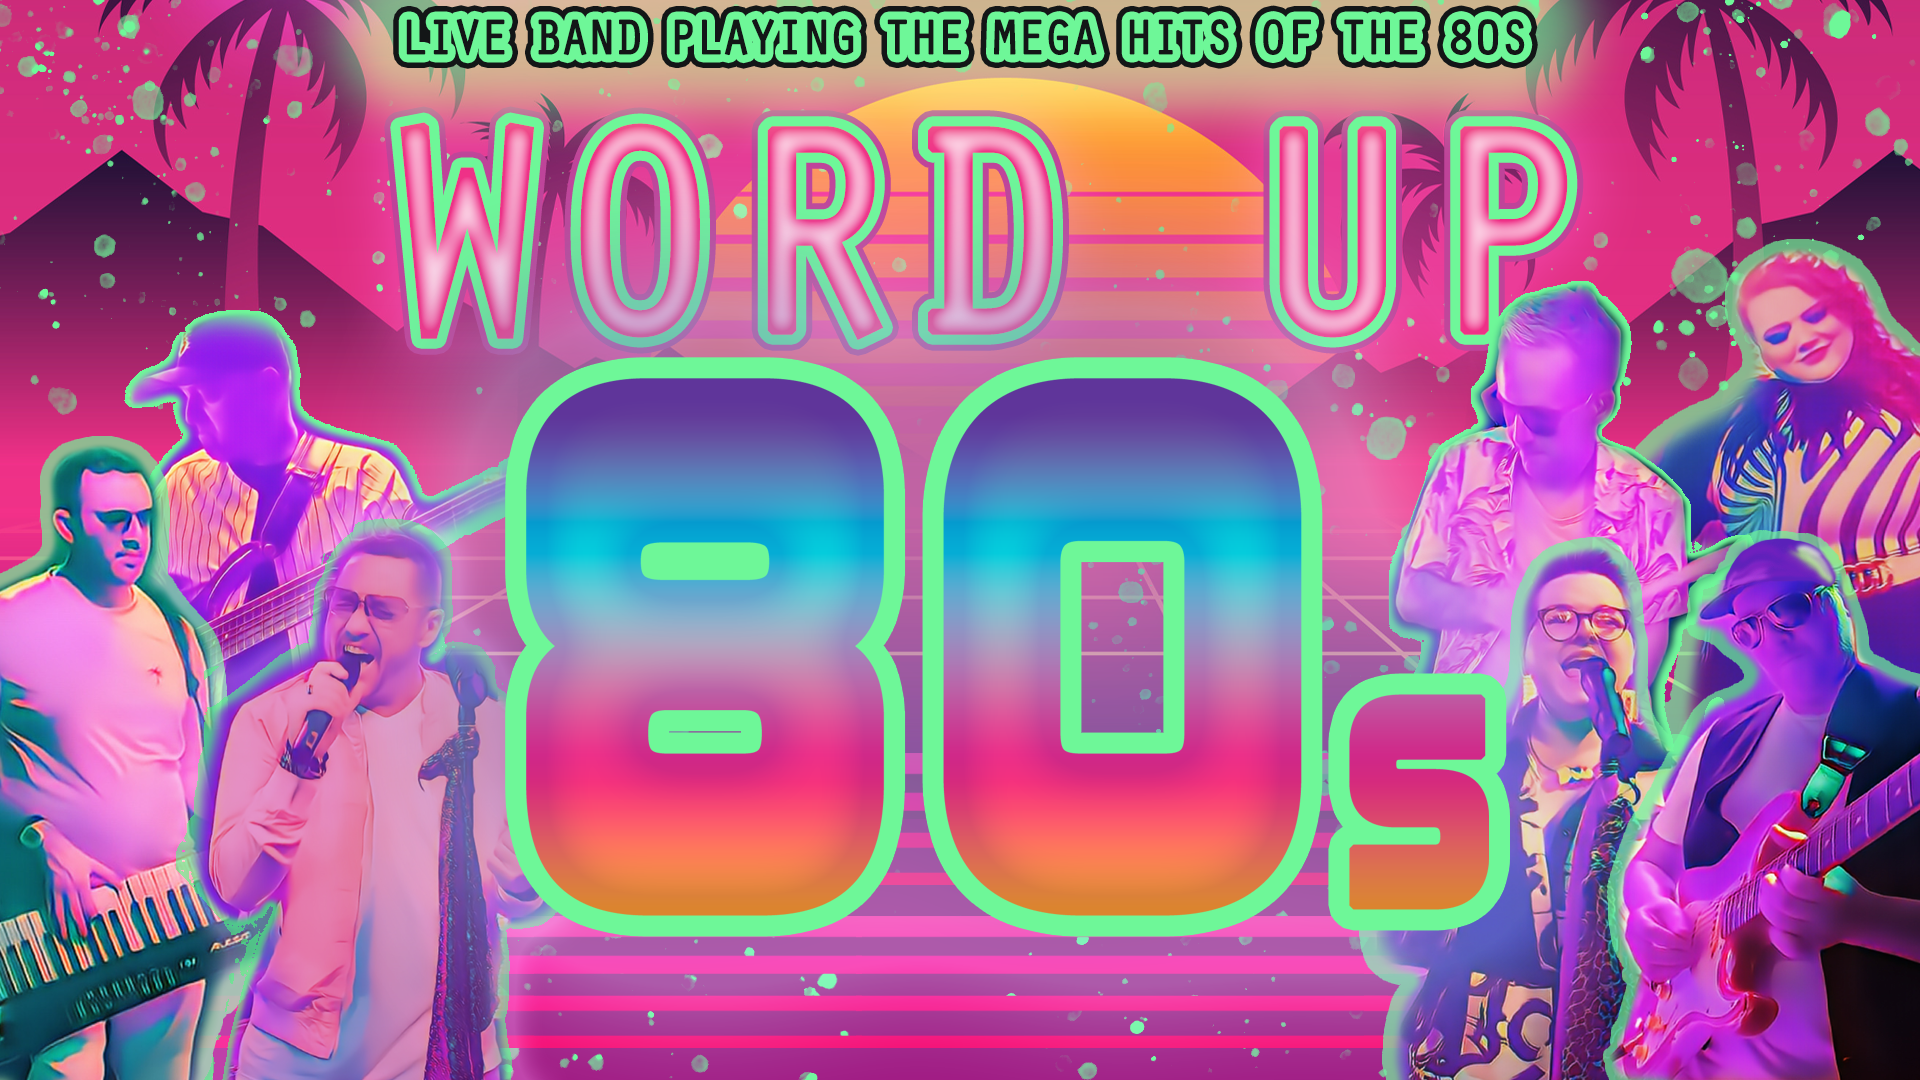 Word Up 80s